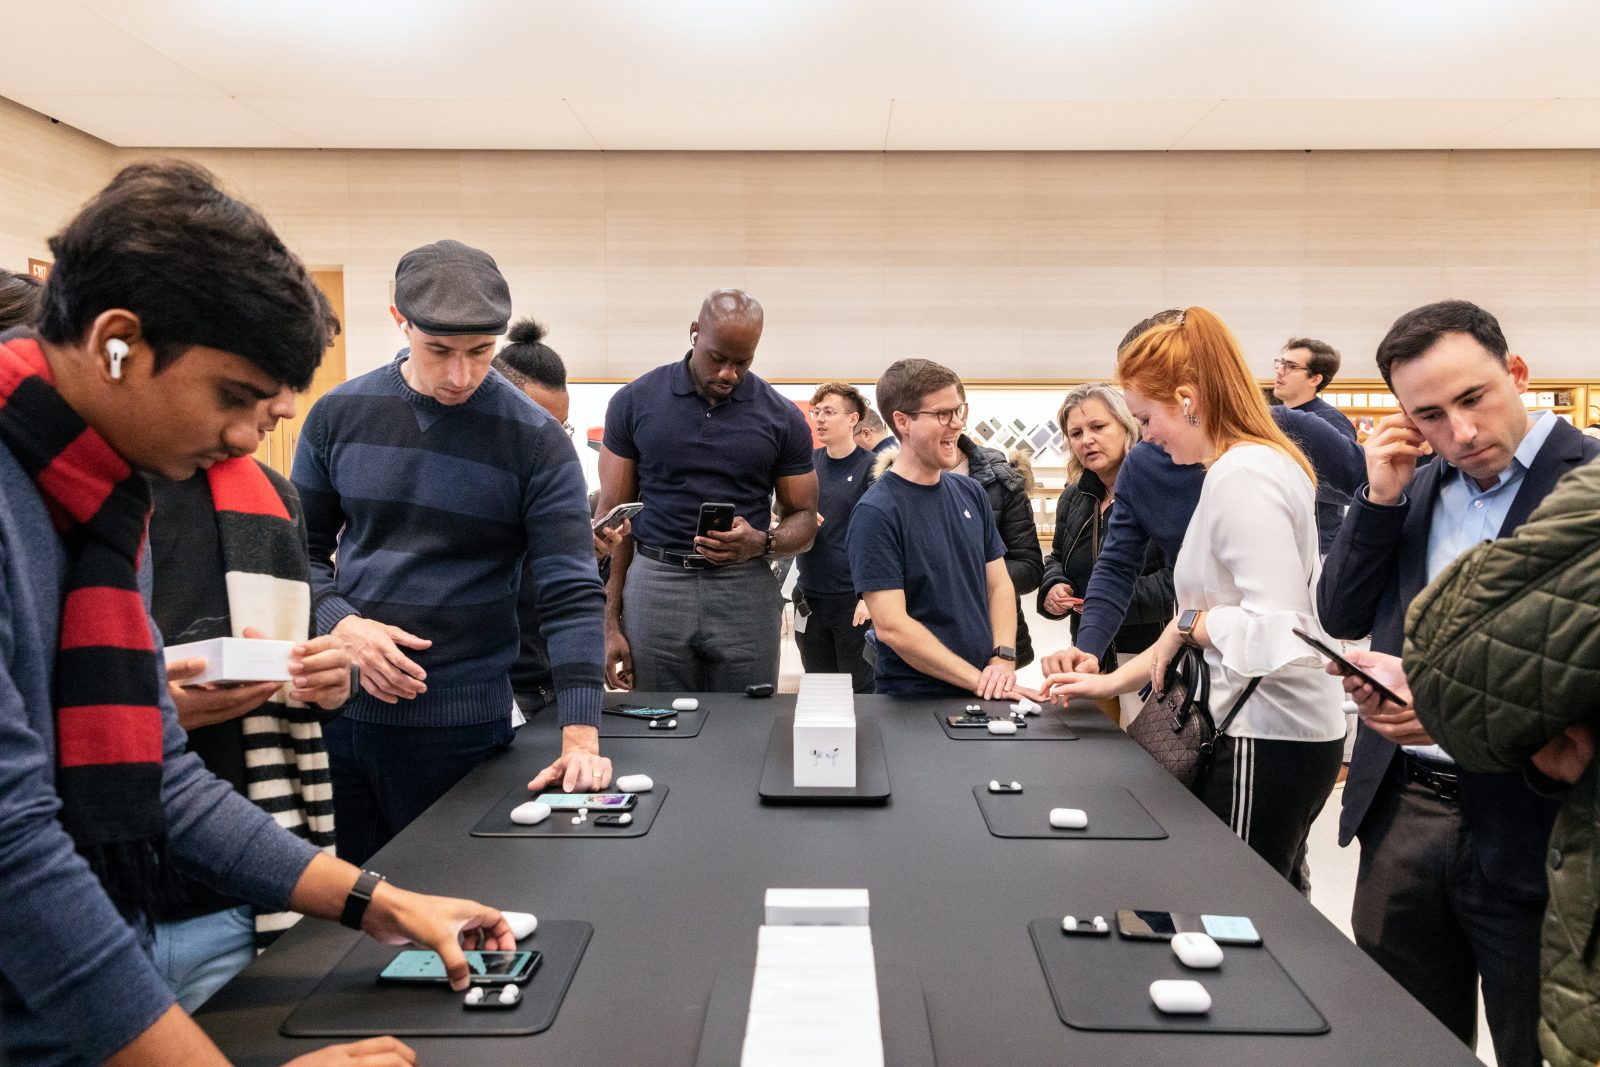 Apple AirPods Pro launch NYC